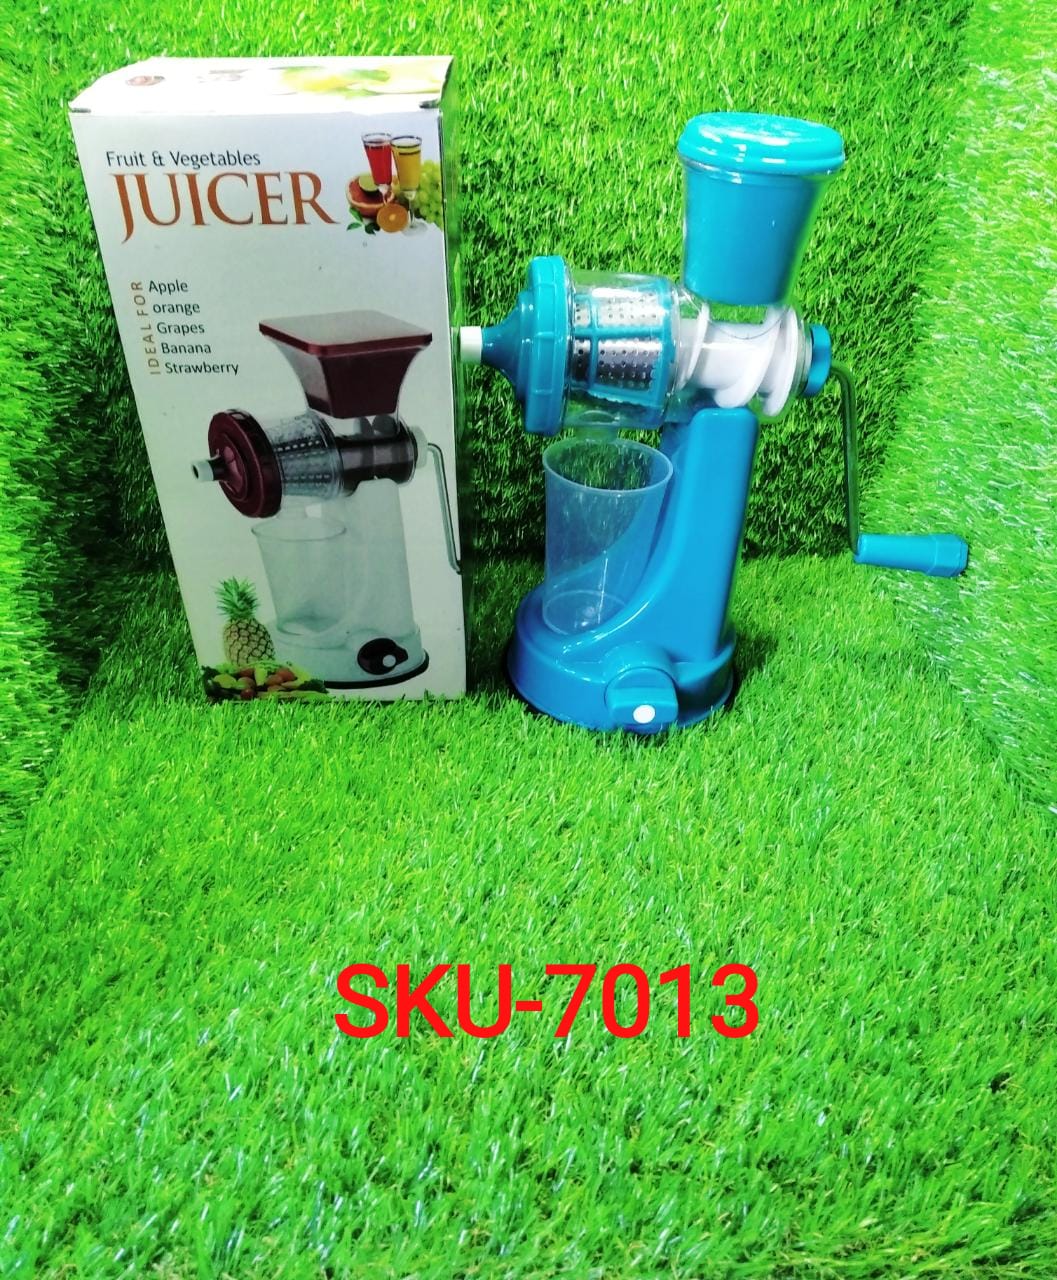 7013 Manual Fruit Vegetable Juicer with Strainer (Multicolour) DeoDap